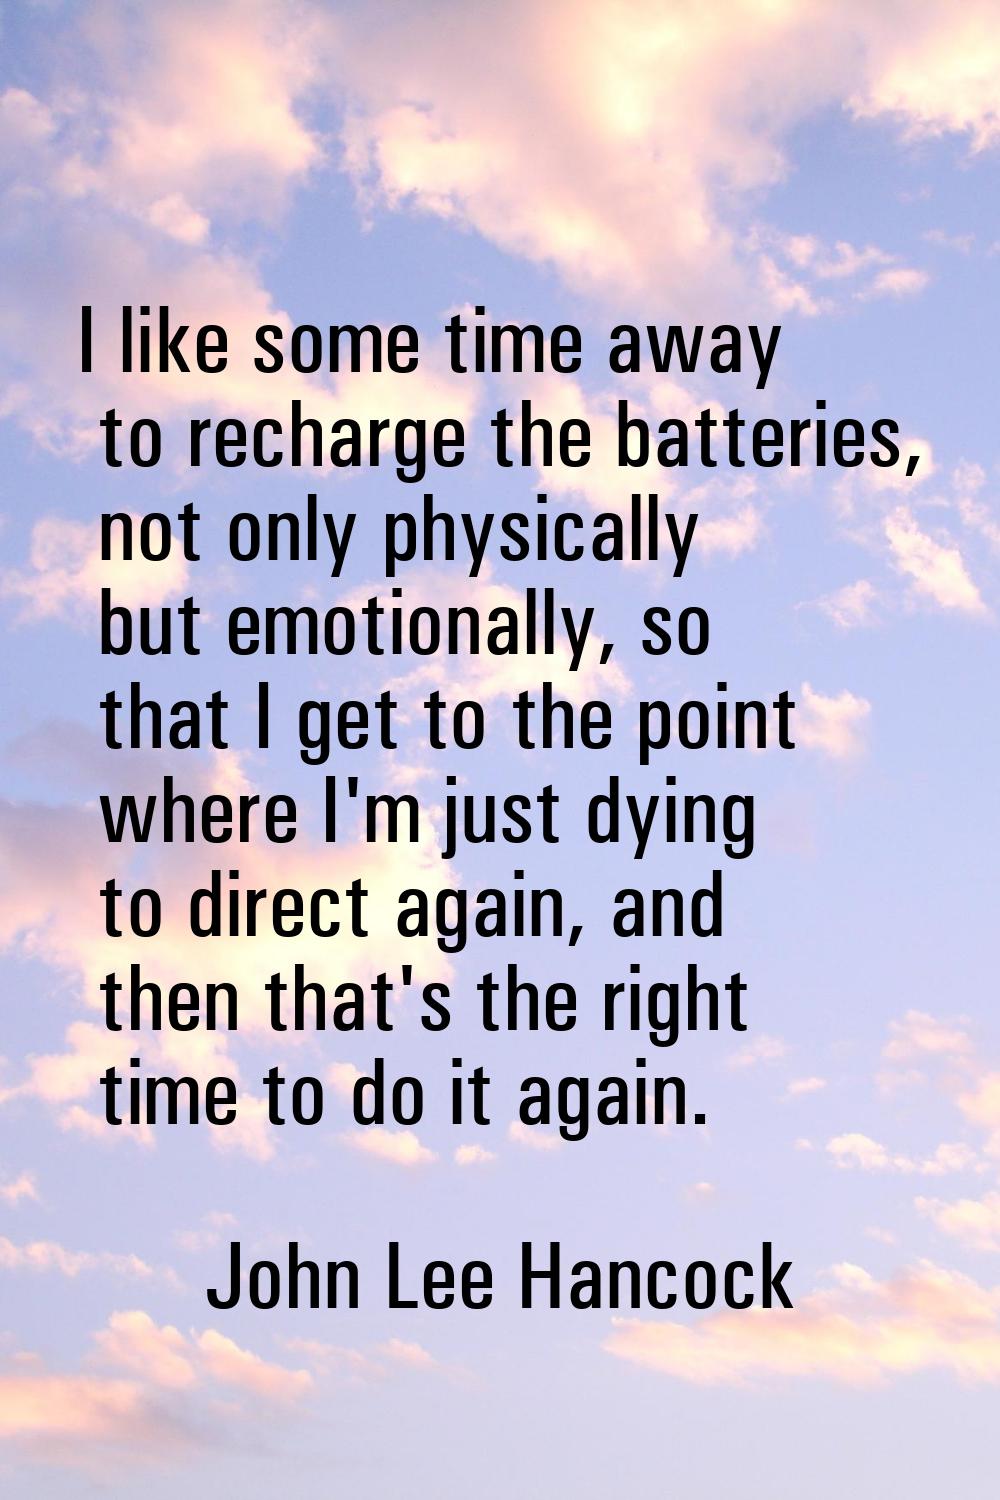 I like some time away to recharge the batteries, not only physically but emotionally, so that I get